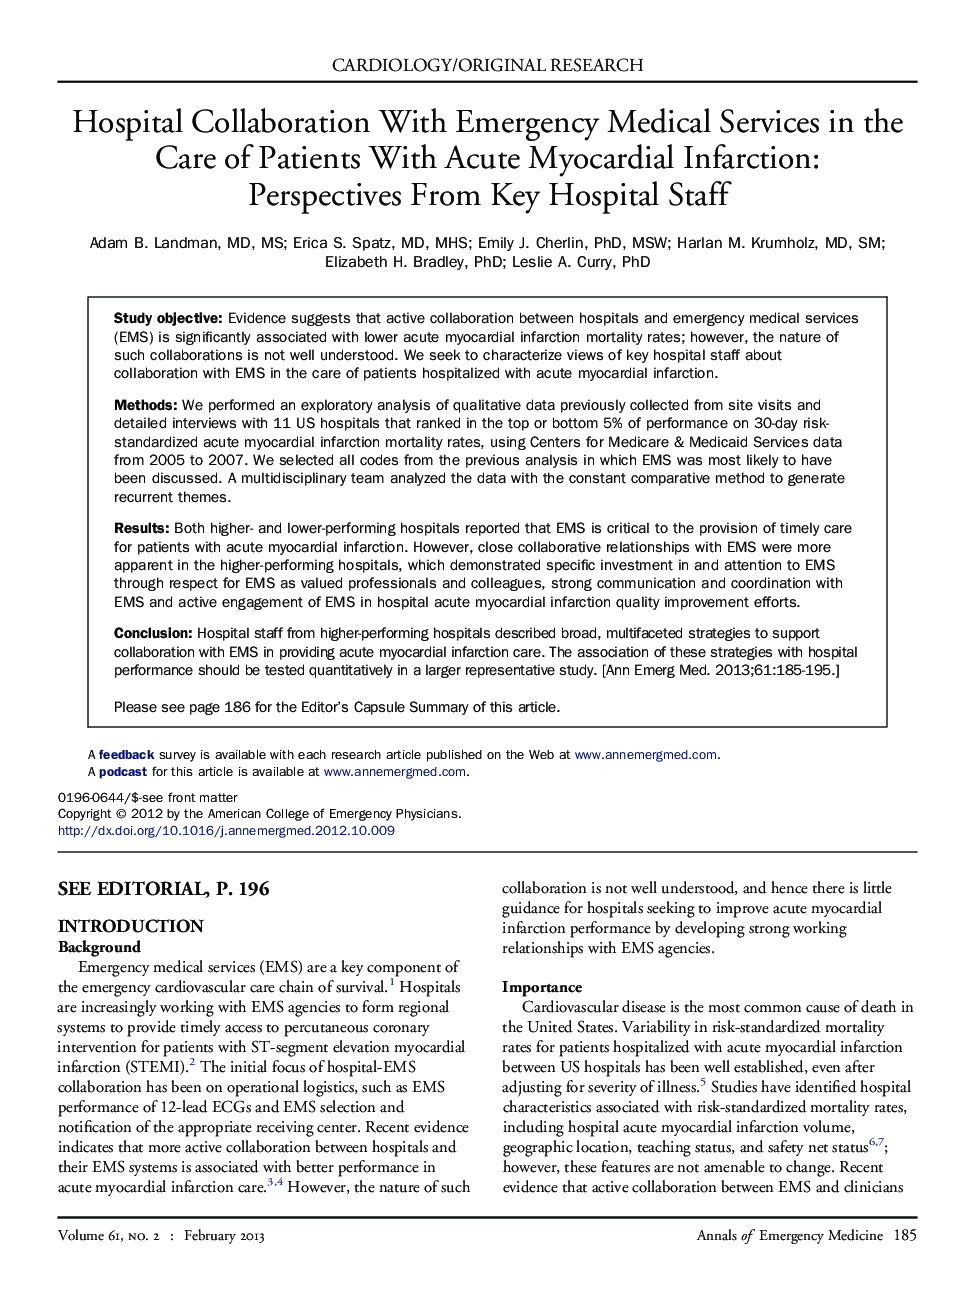 Hospital Collaboration With Emergency Medical Services in the Care of Patients With Acute Myocardial Infarction: Perspectives From Key Hospital Staff 